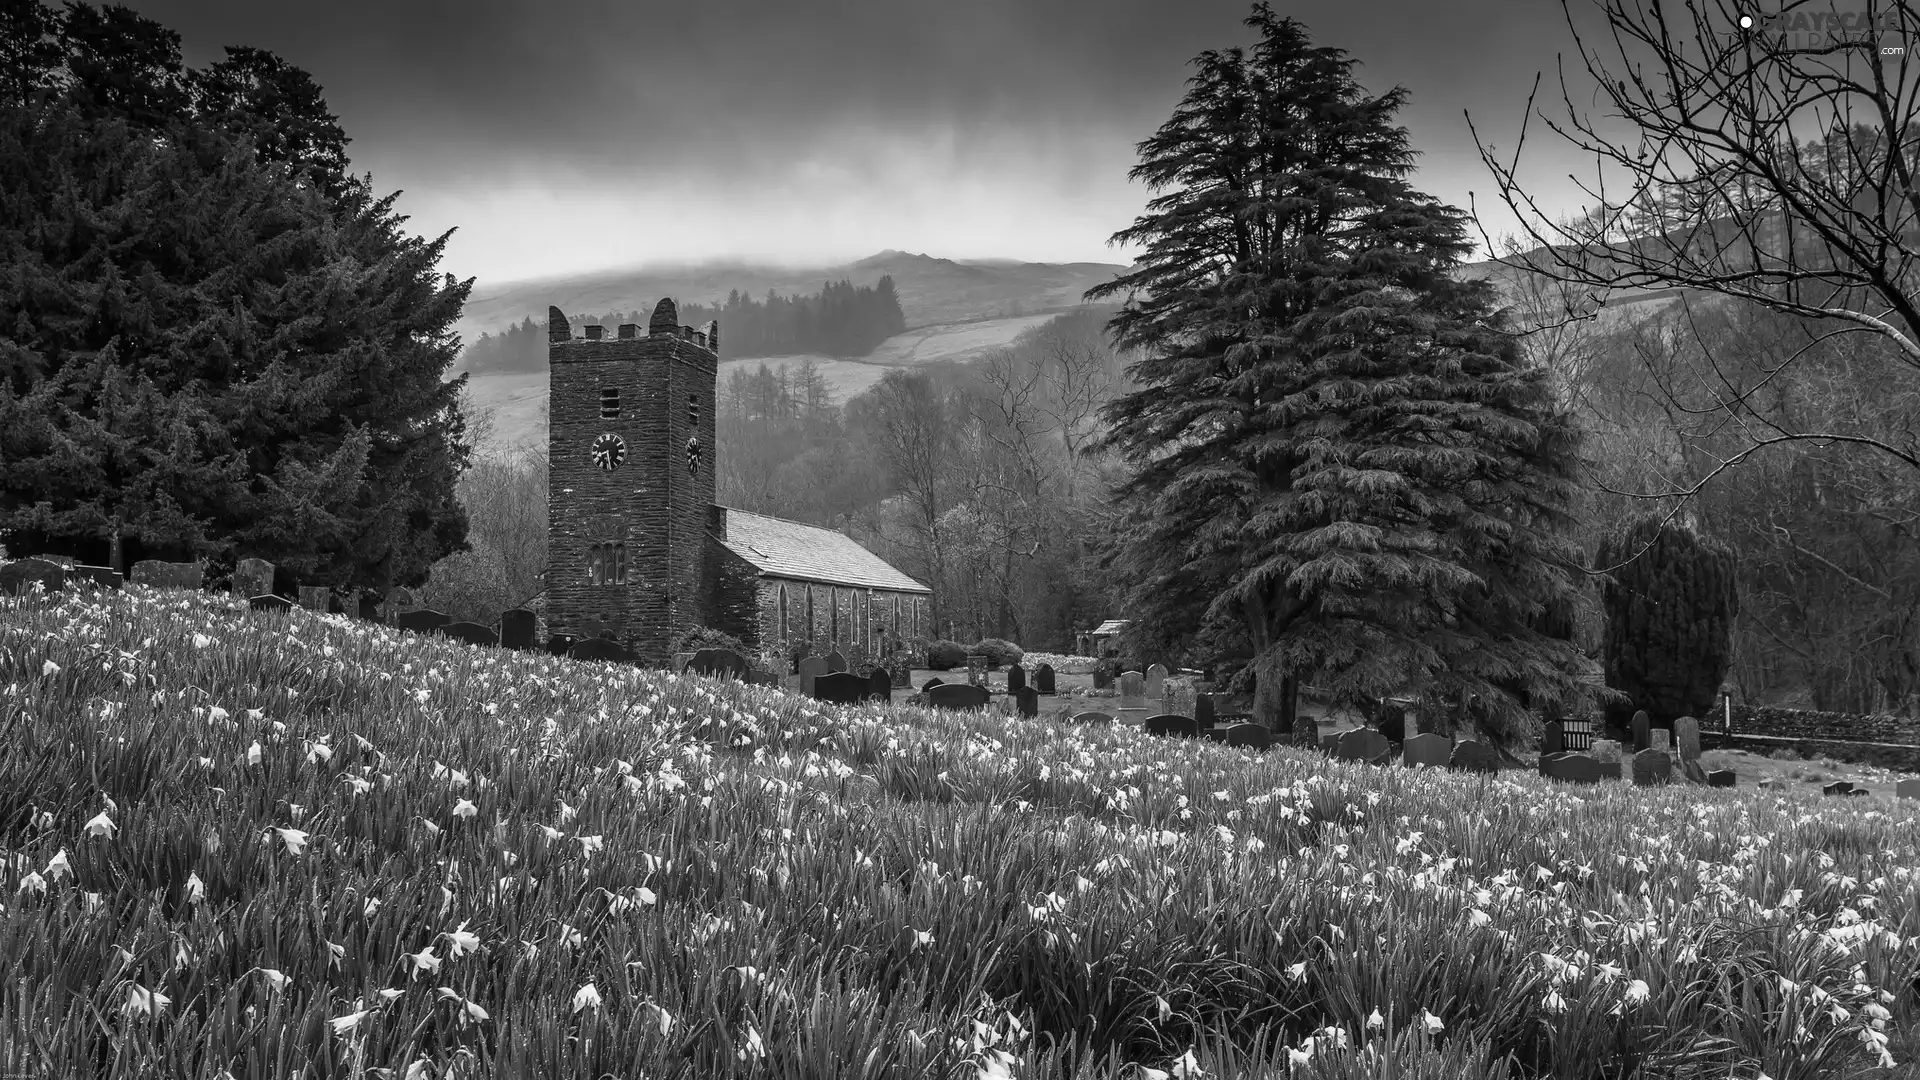 Daffodils, chapel, woods, Spring, Mountains, Meadow